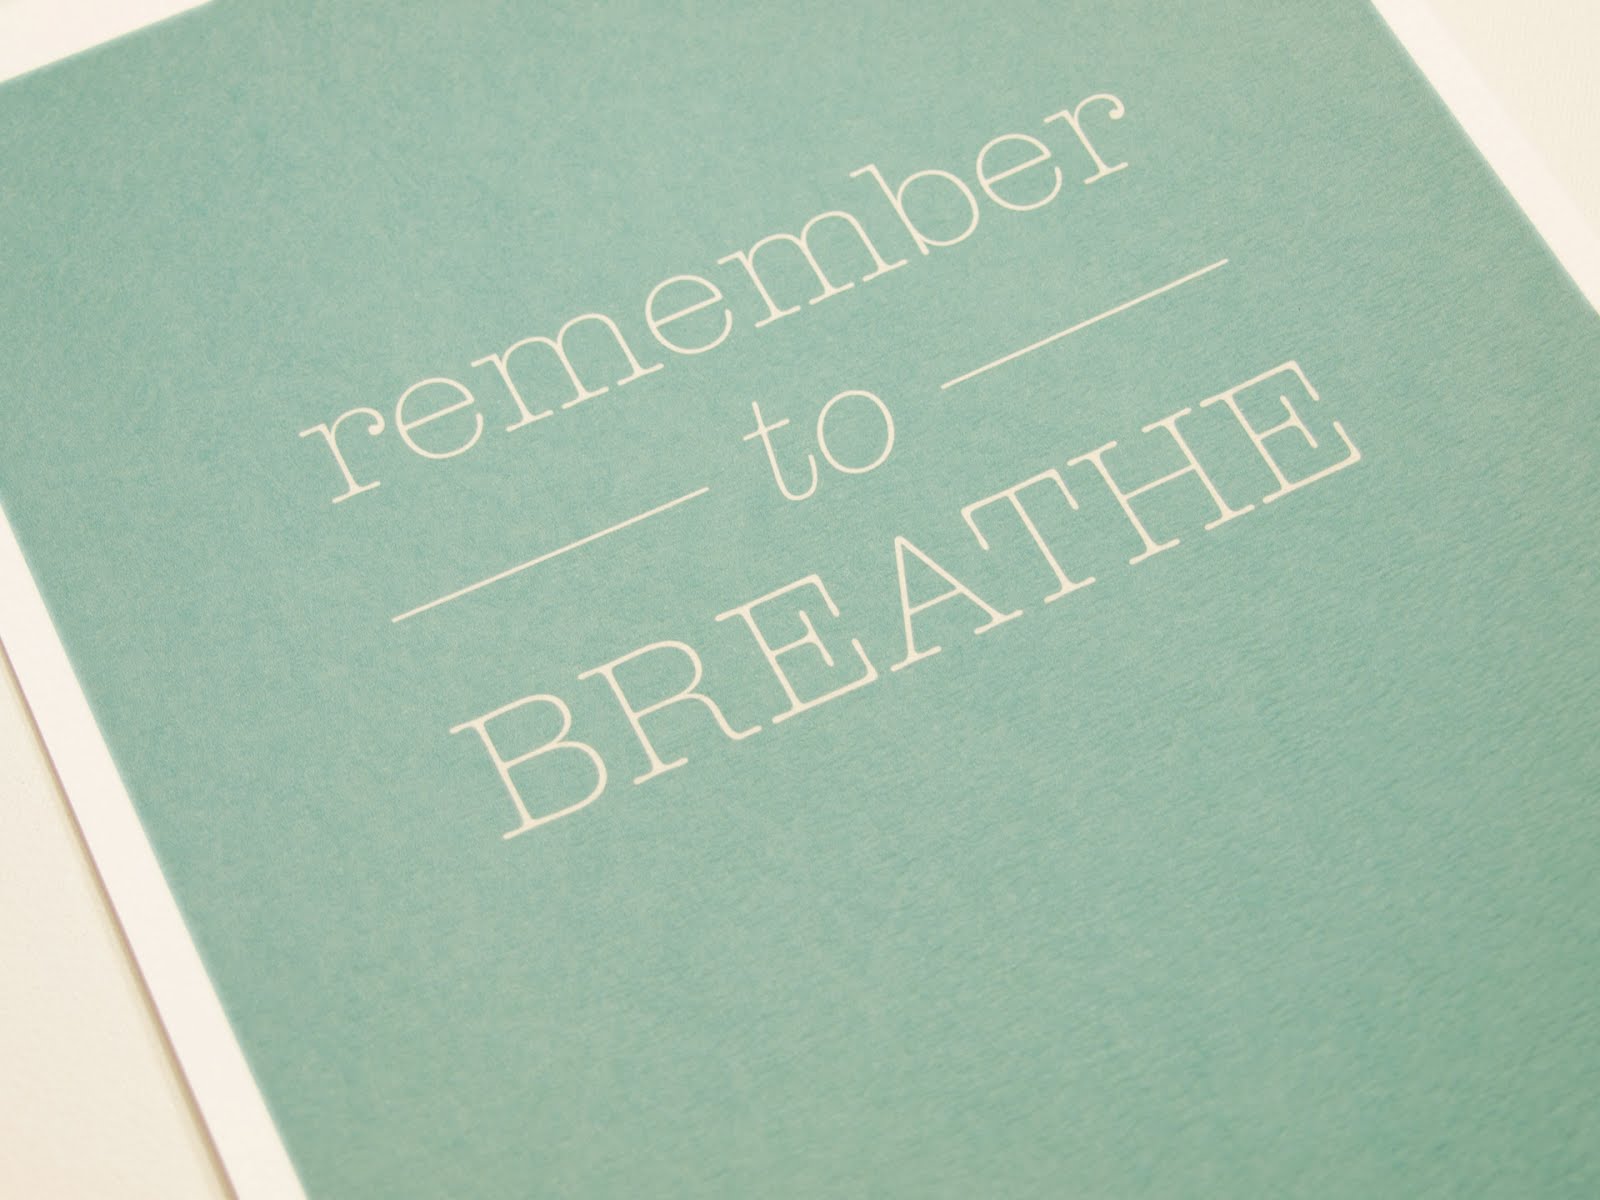 Remember to breathe